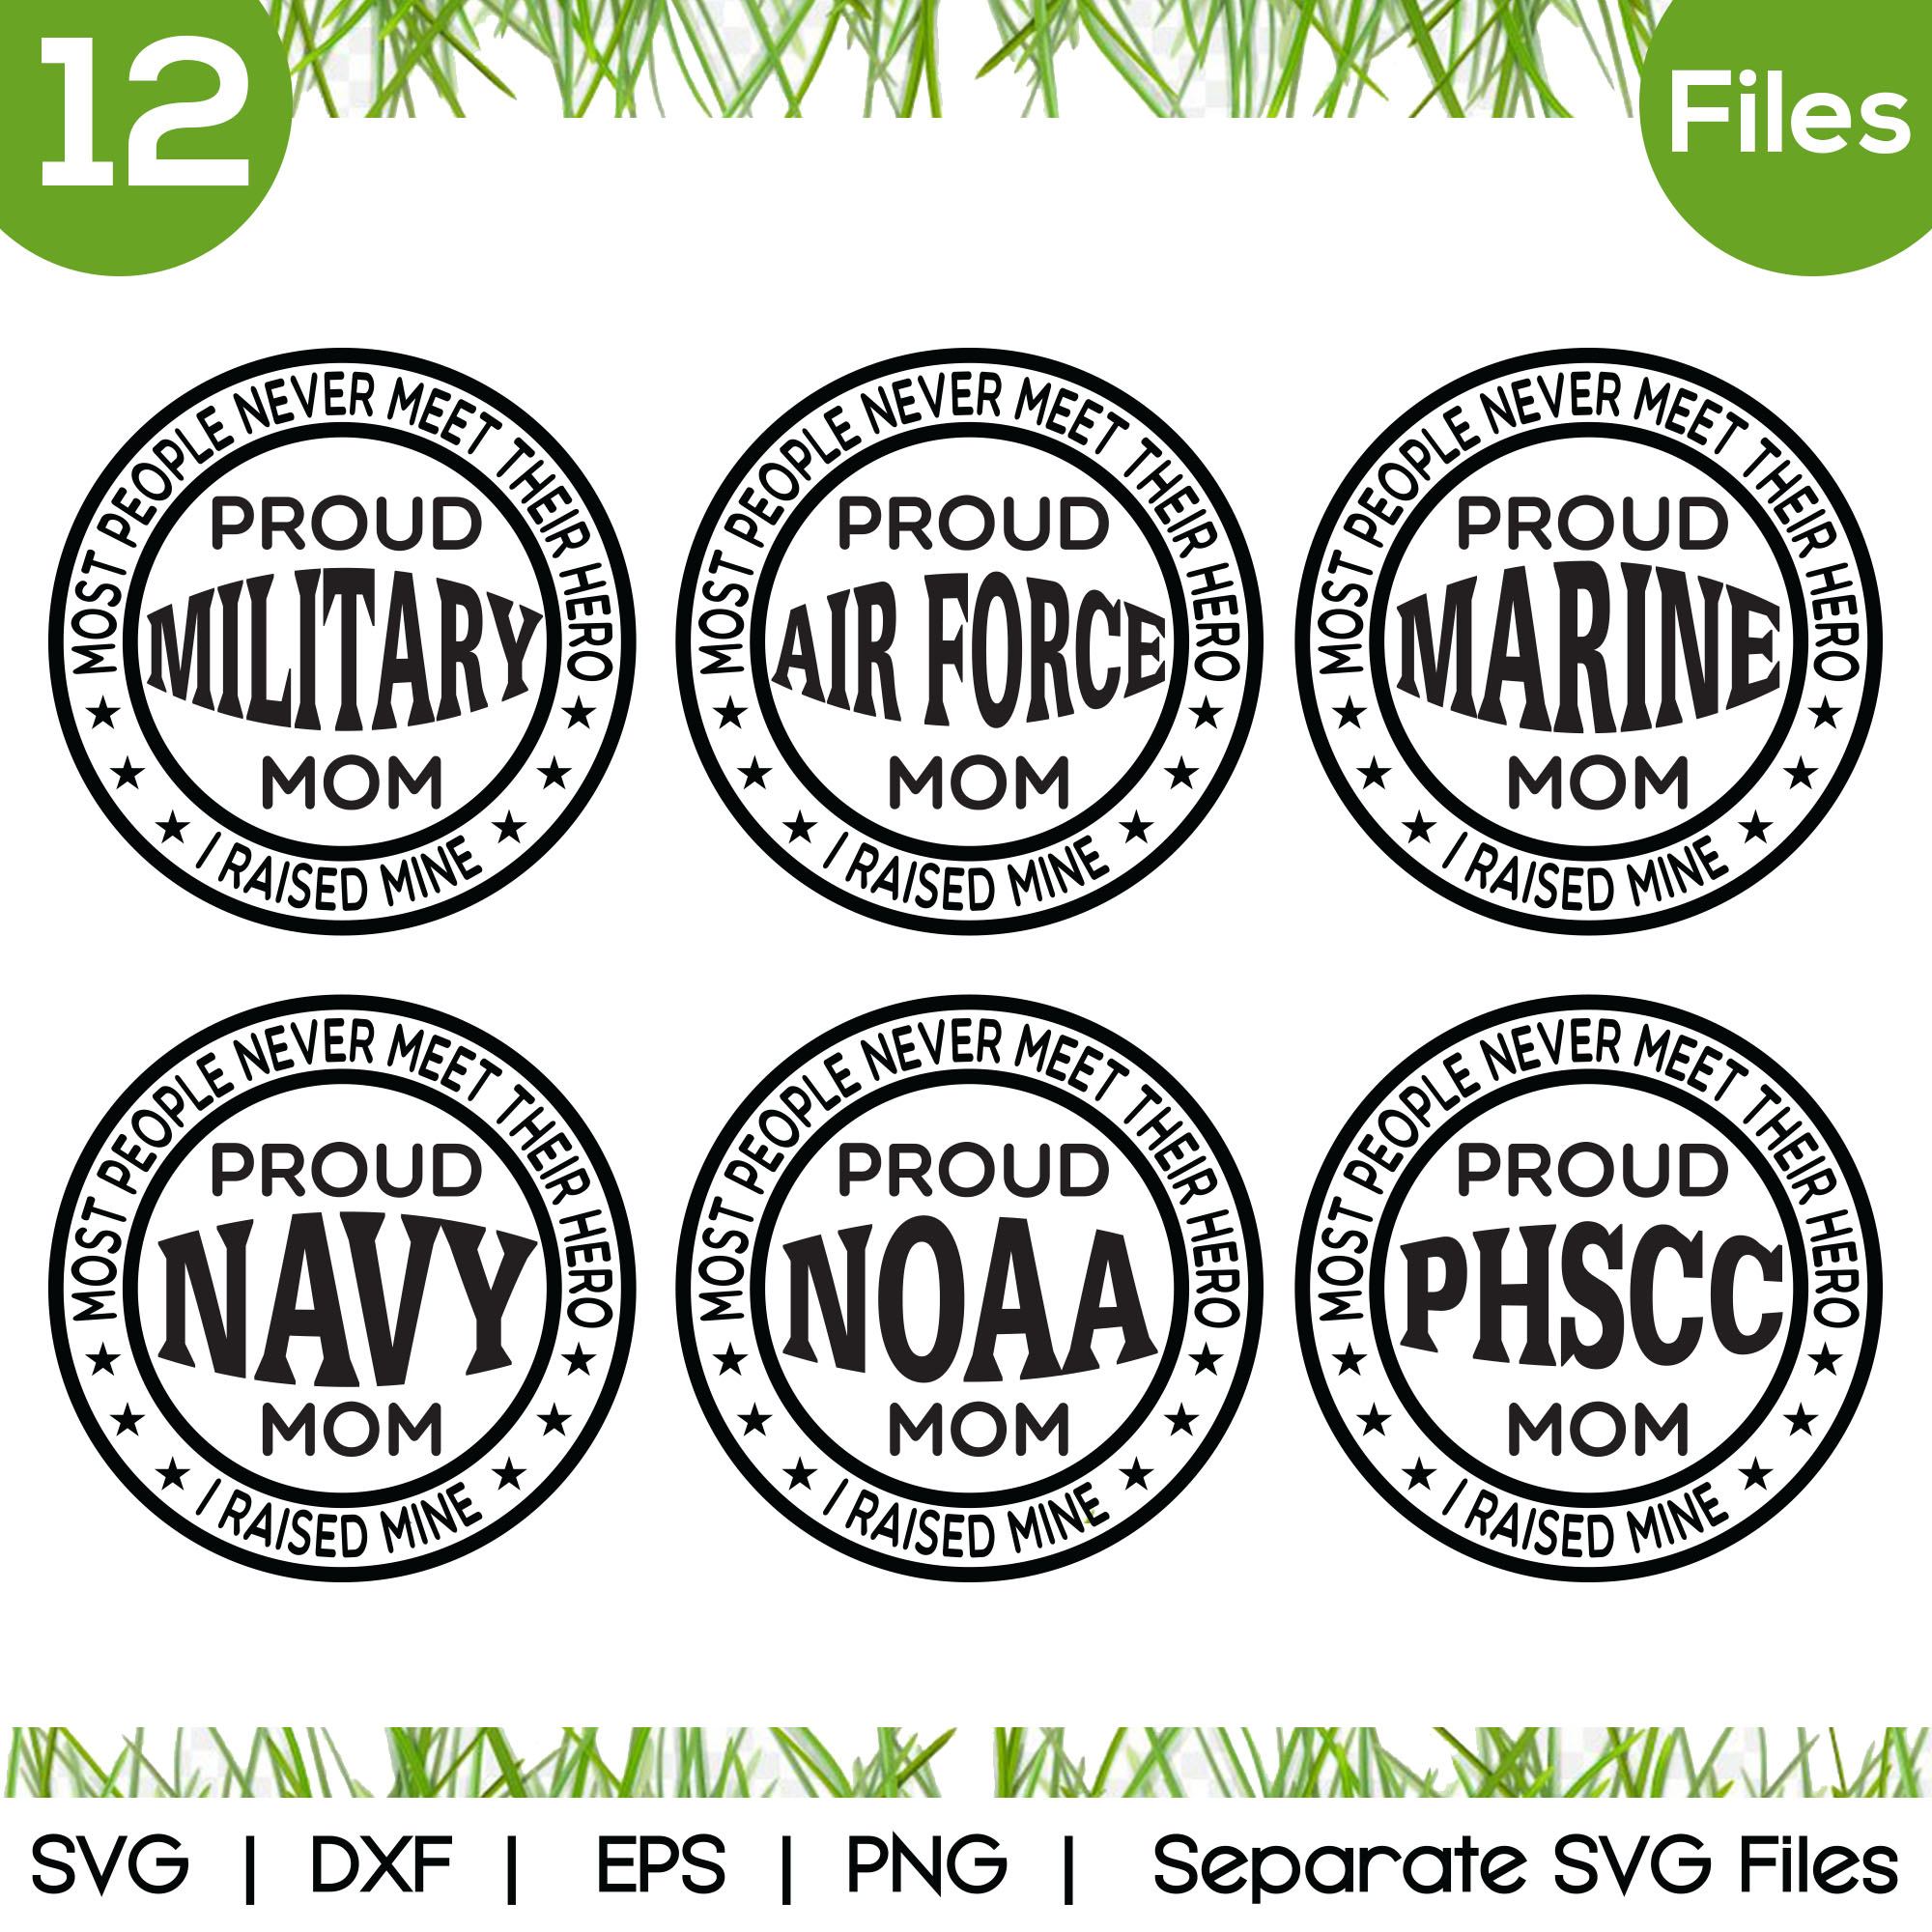 Download Proud Military Mom SVG Cut Files - vector svg format